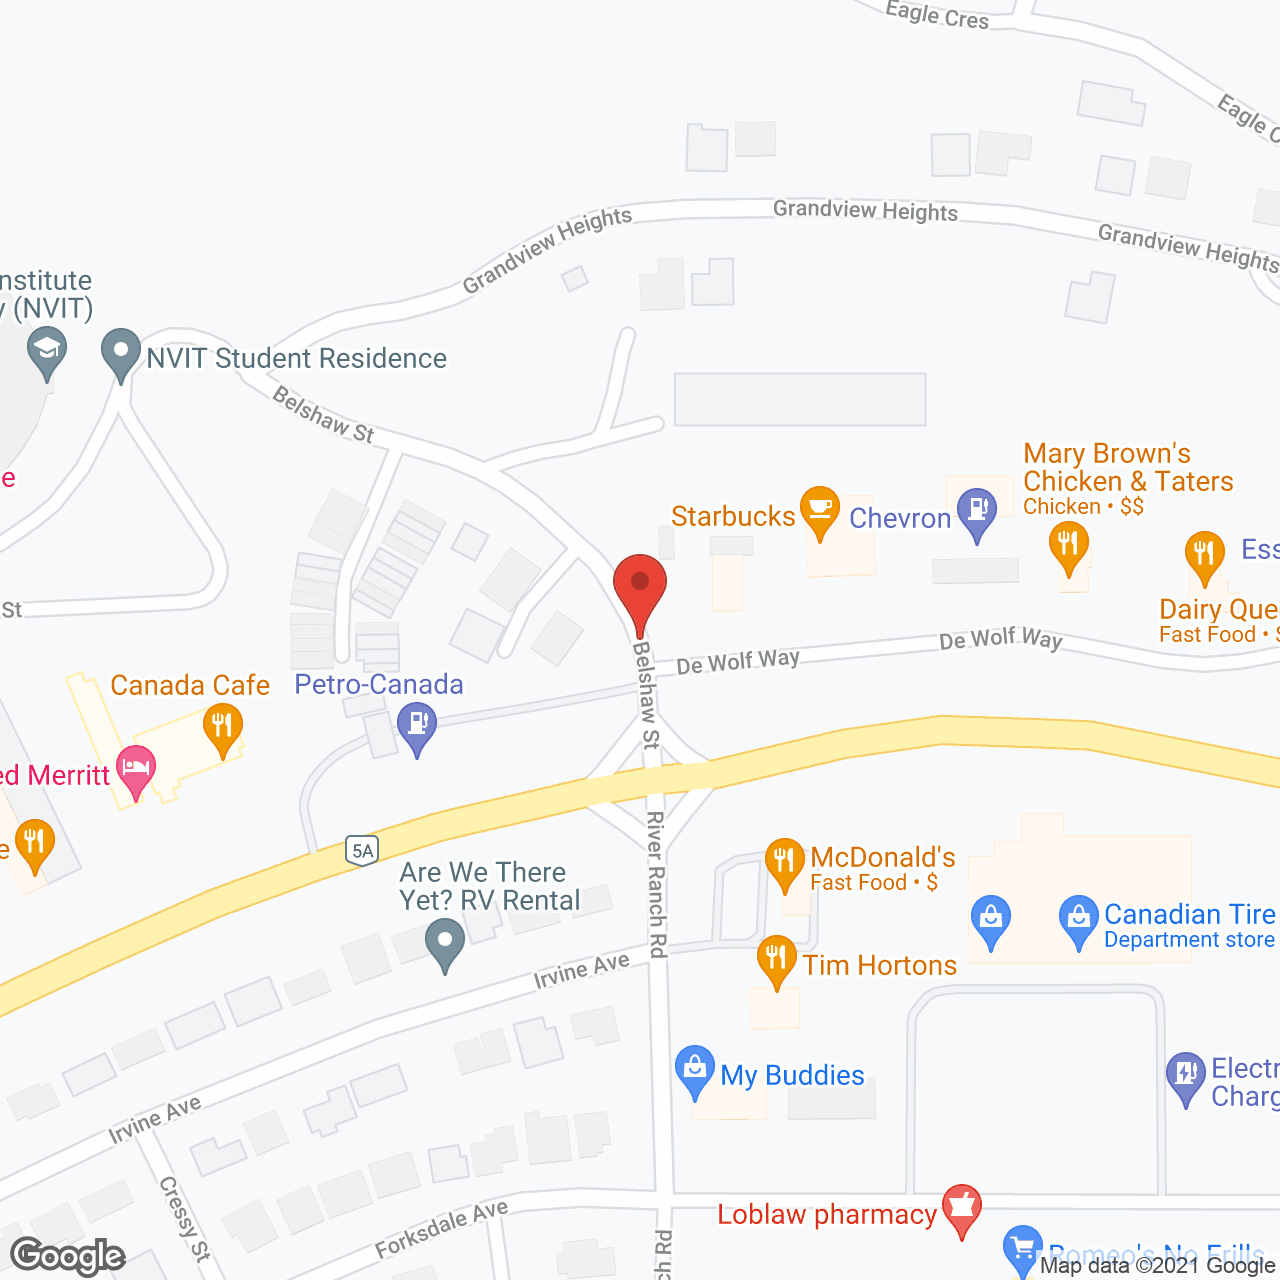 Three Eagles in google map